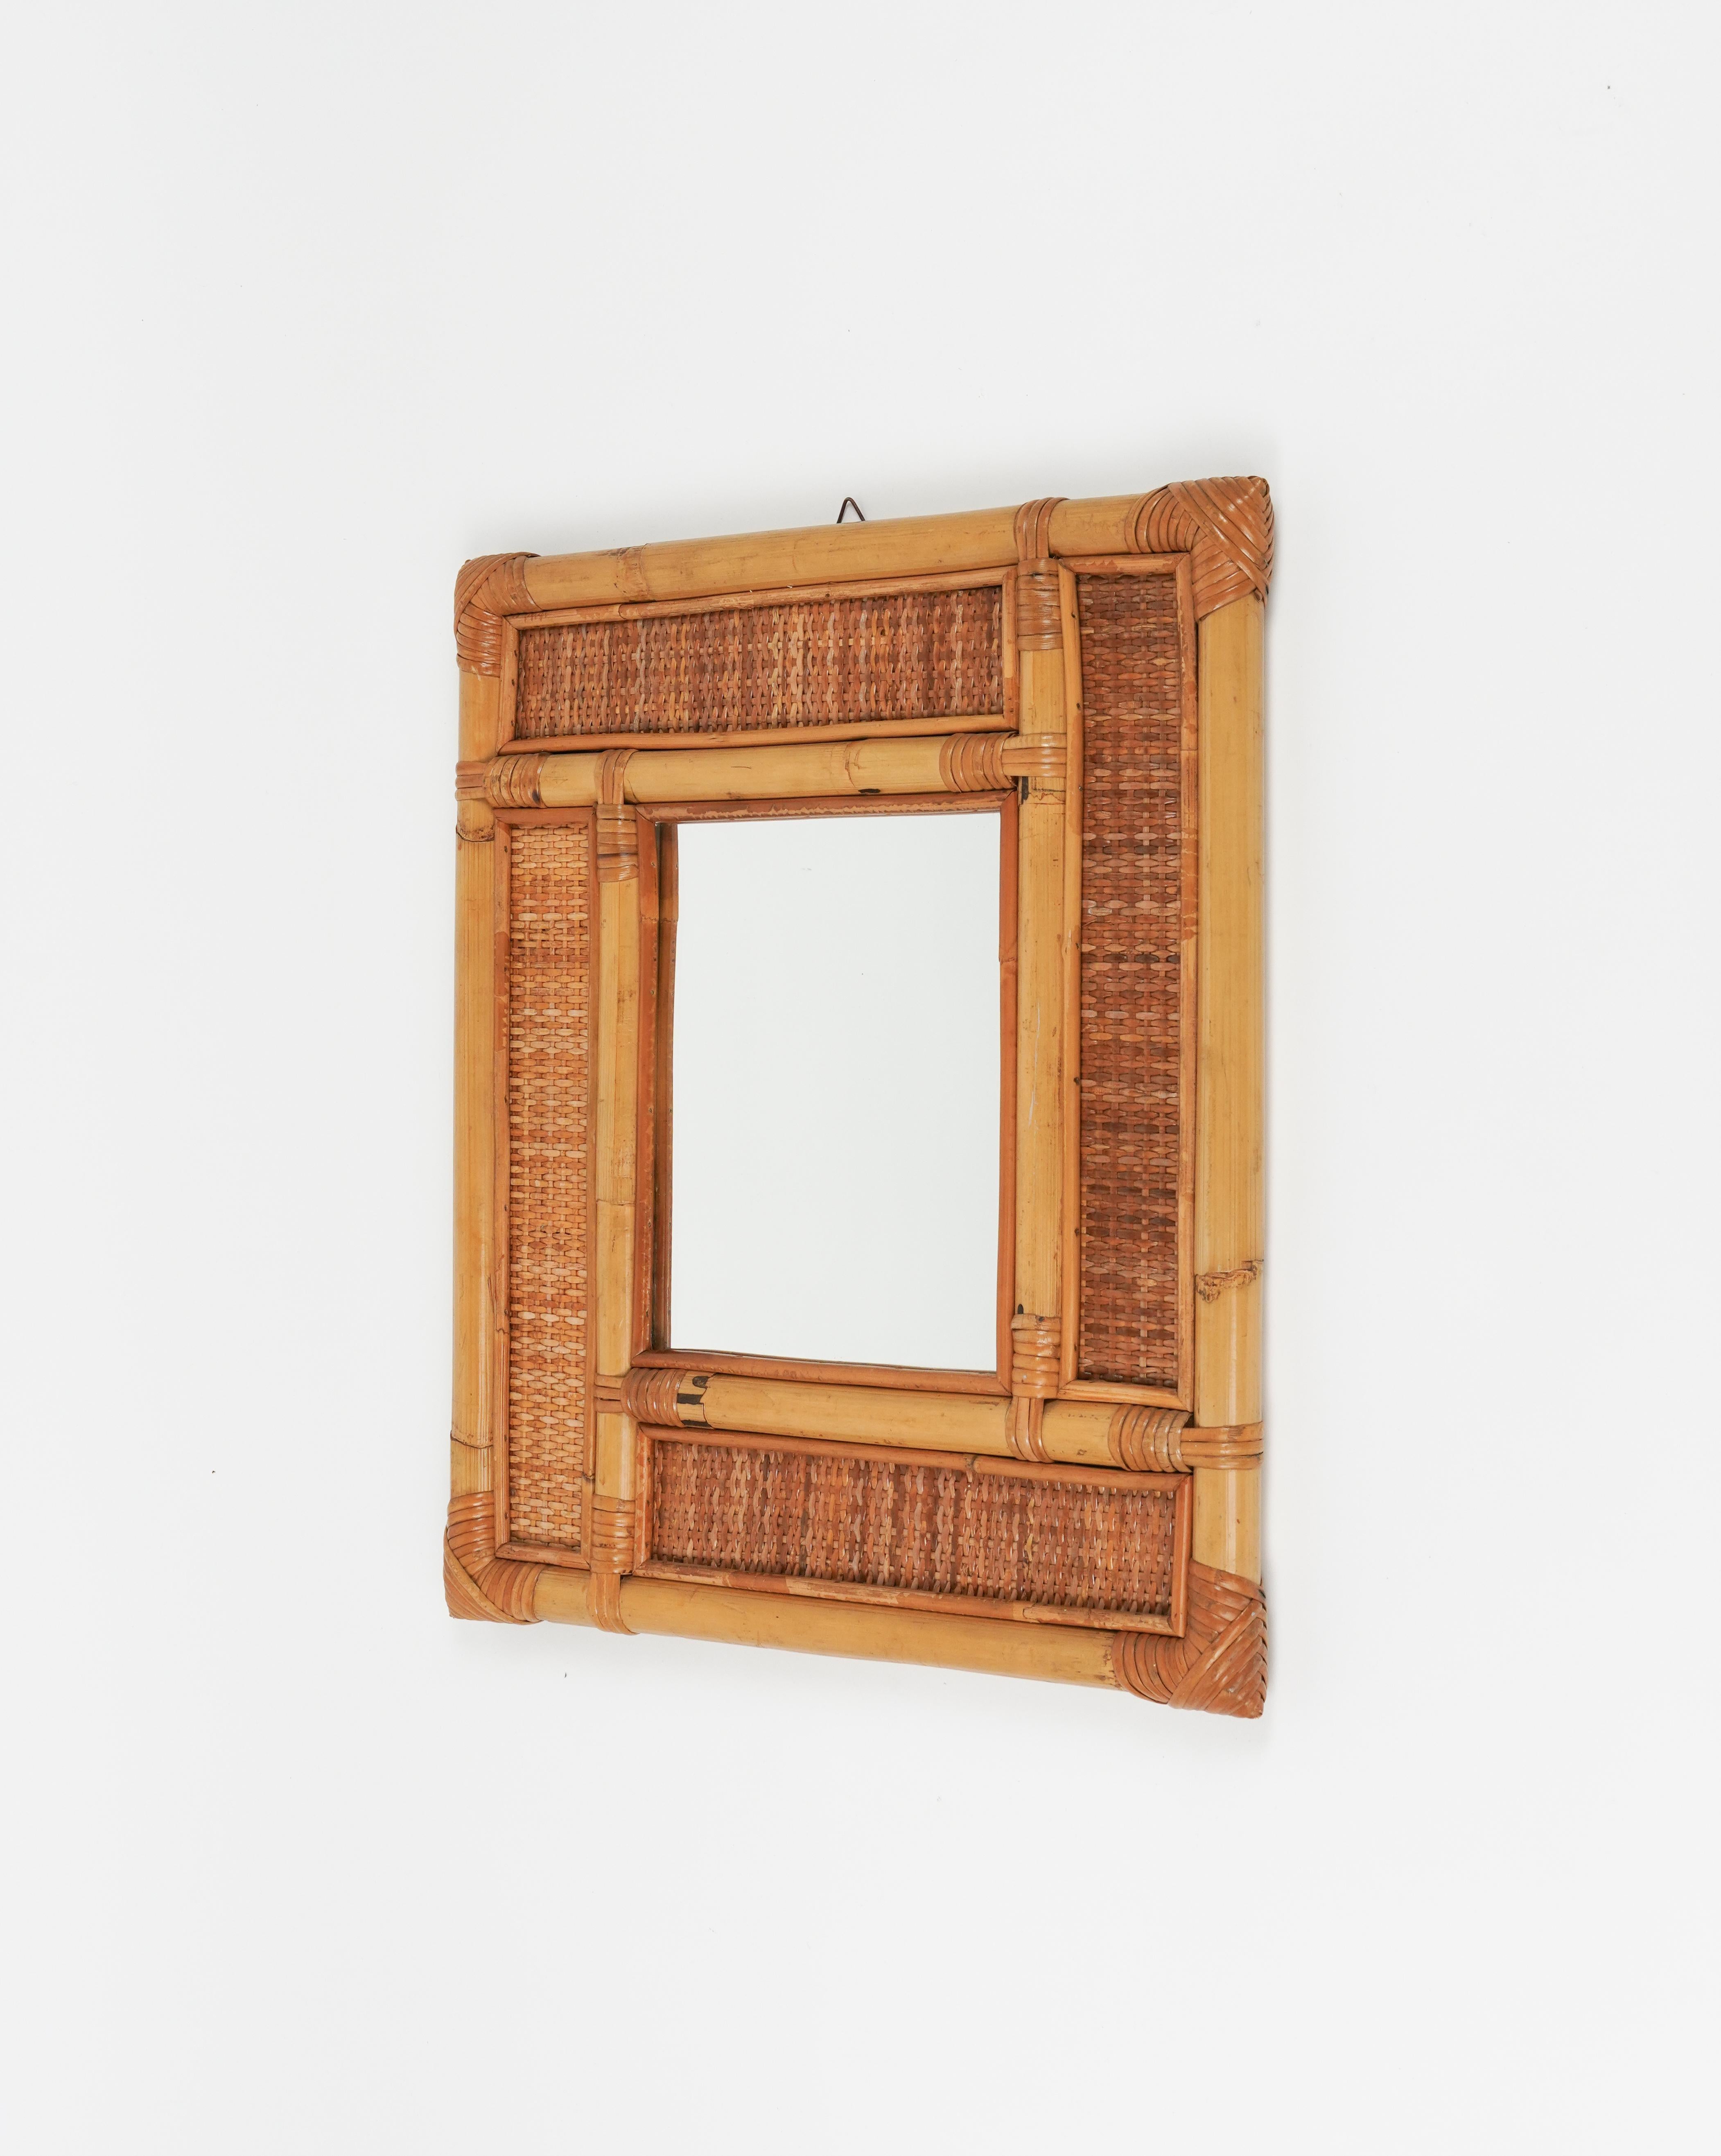 Midcentury Bamboo and Rattan Wall Mirror Vivai Del Sud Style, Italy 1970s For Sale 2